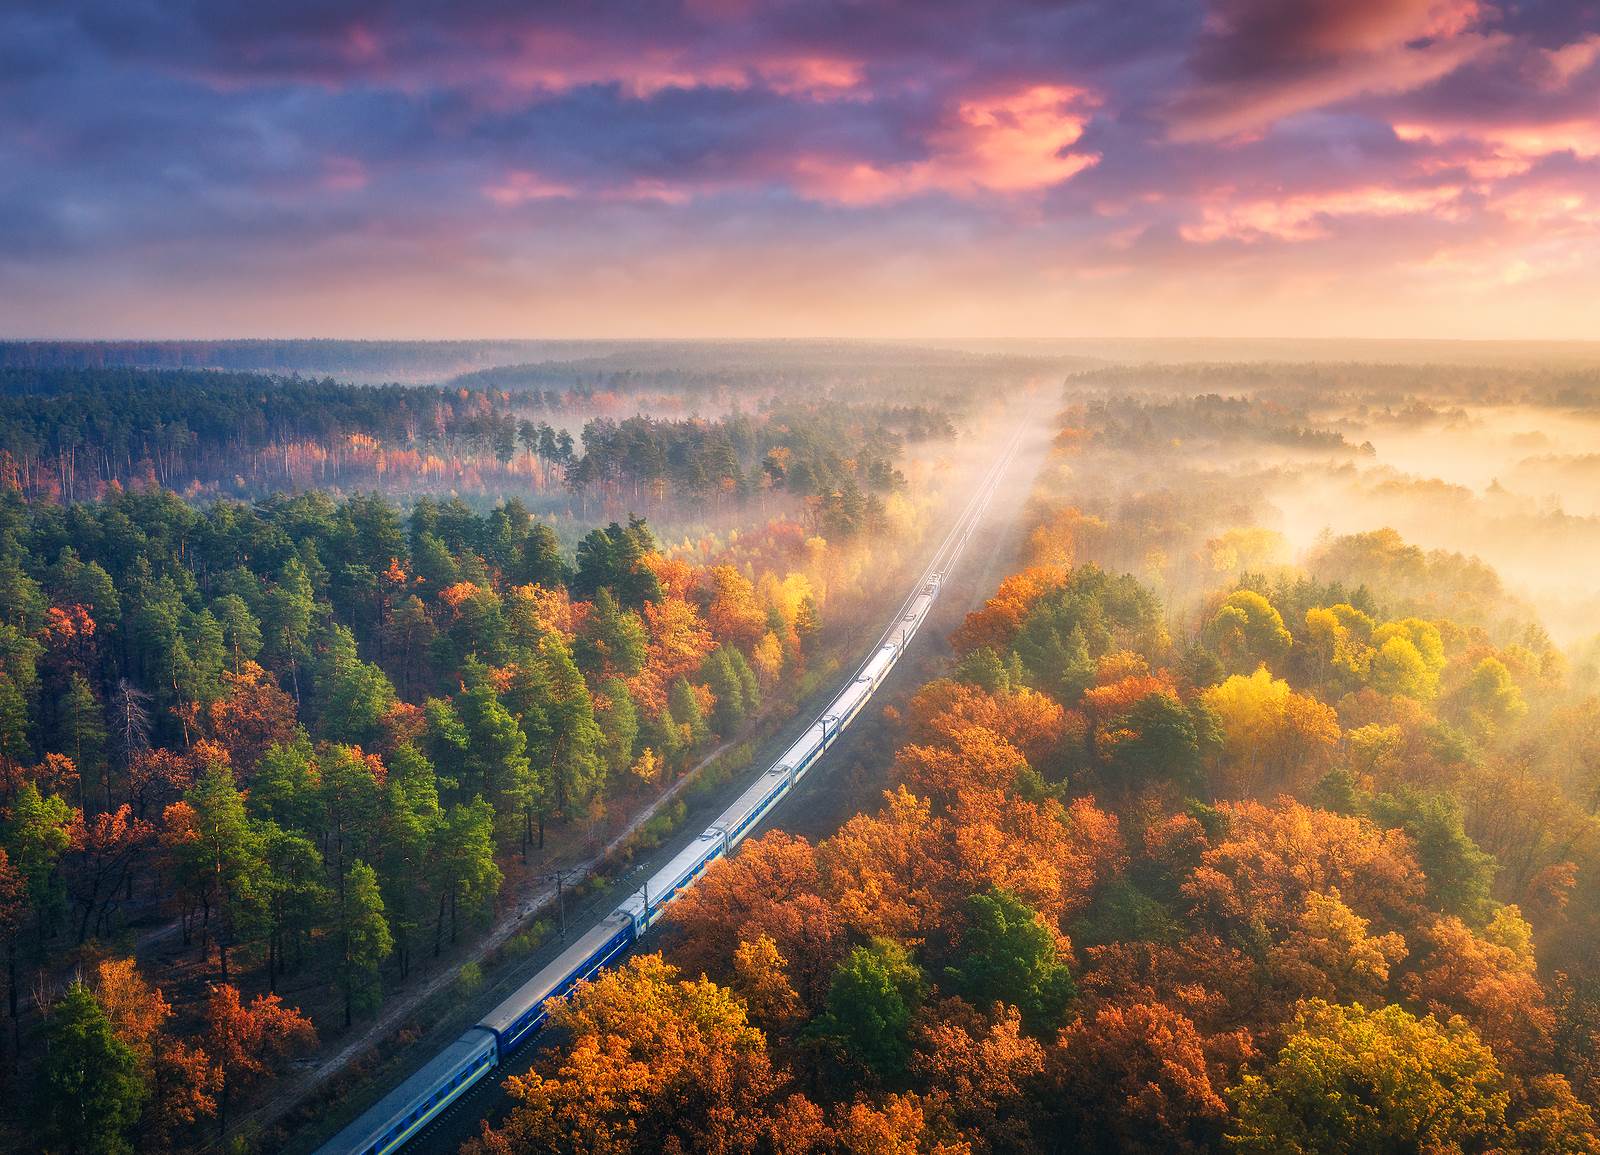 Aerial view of train in forest in autumn fog at sunset